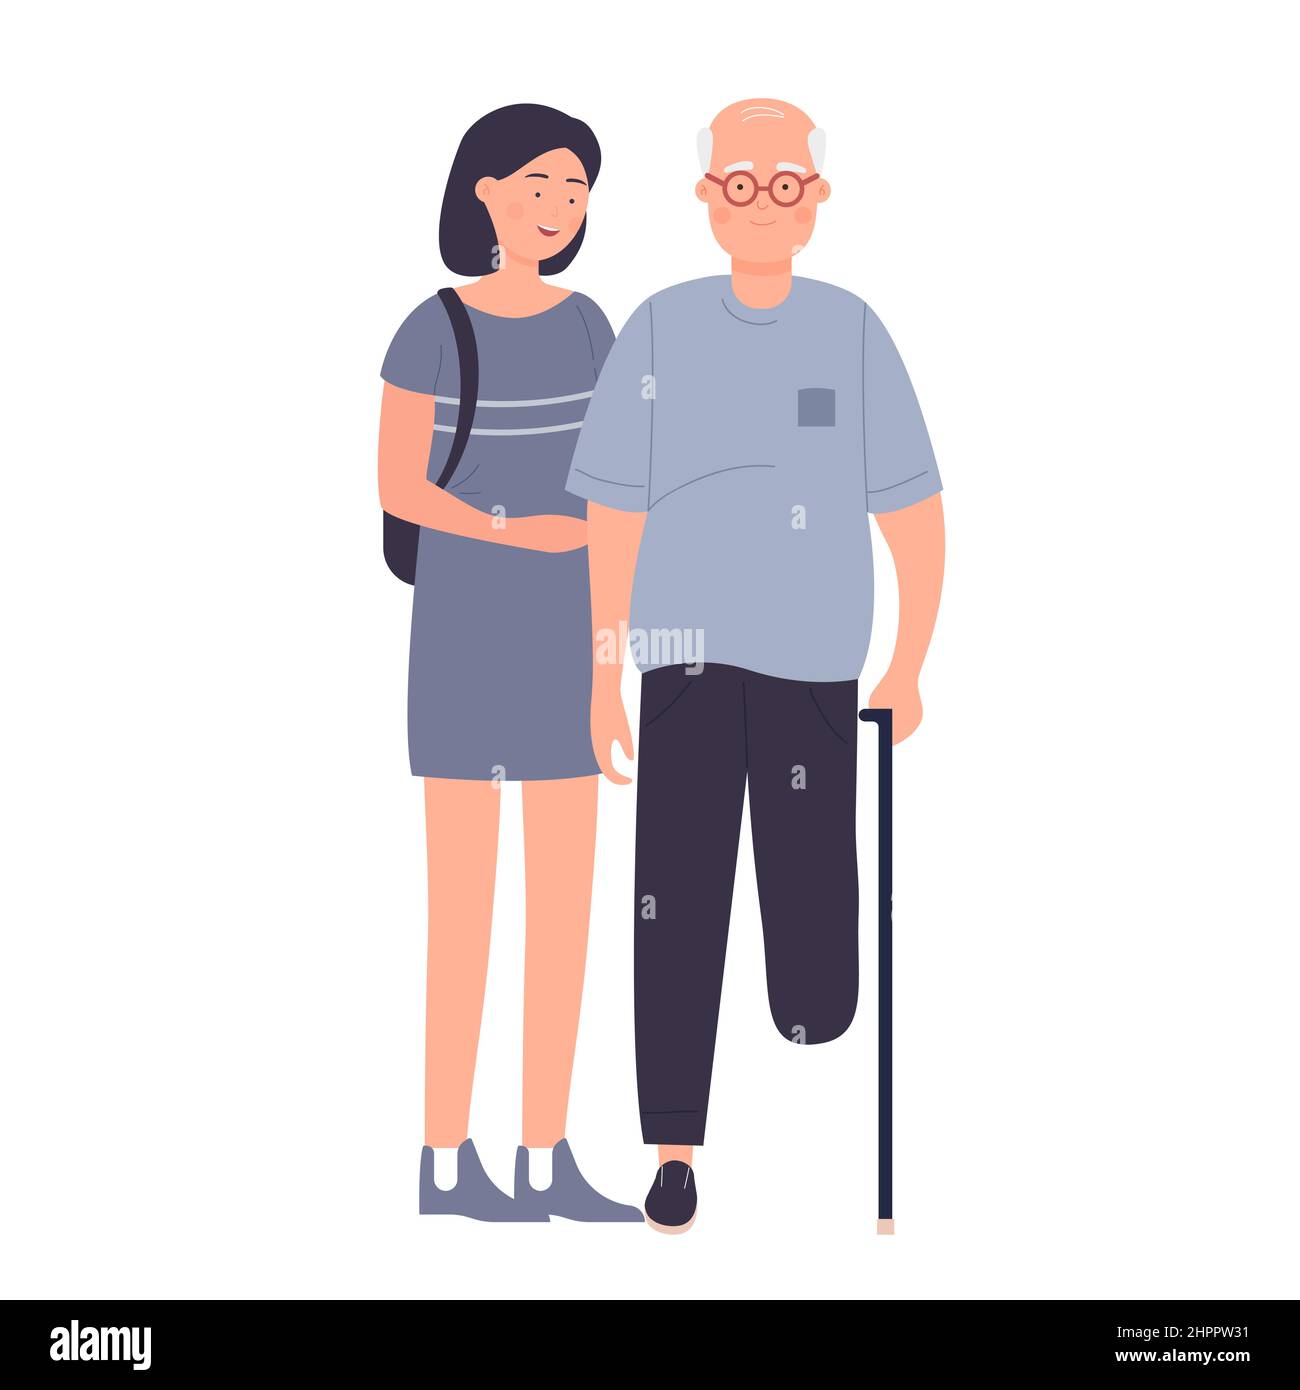 Girl supporting senior man with amputated leg. Sympathy and helping disabled people cartoon vector illustration Stock Vector